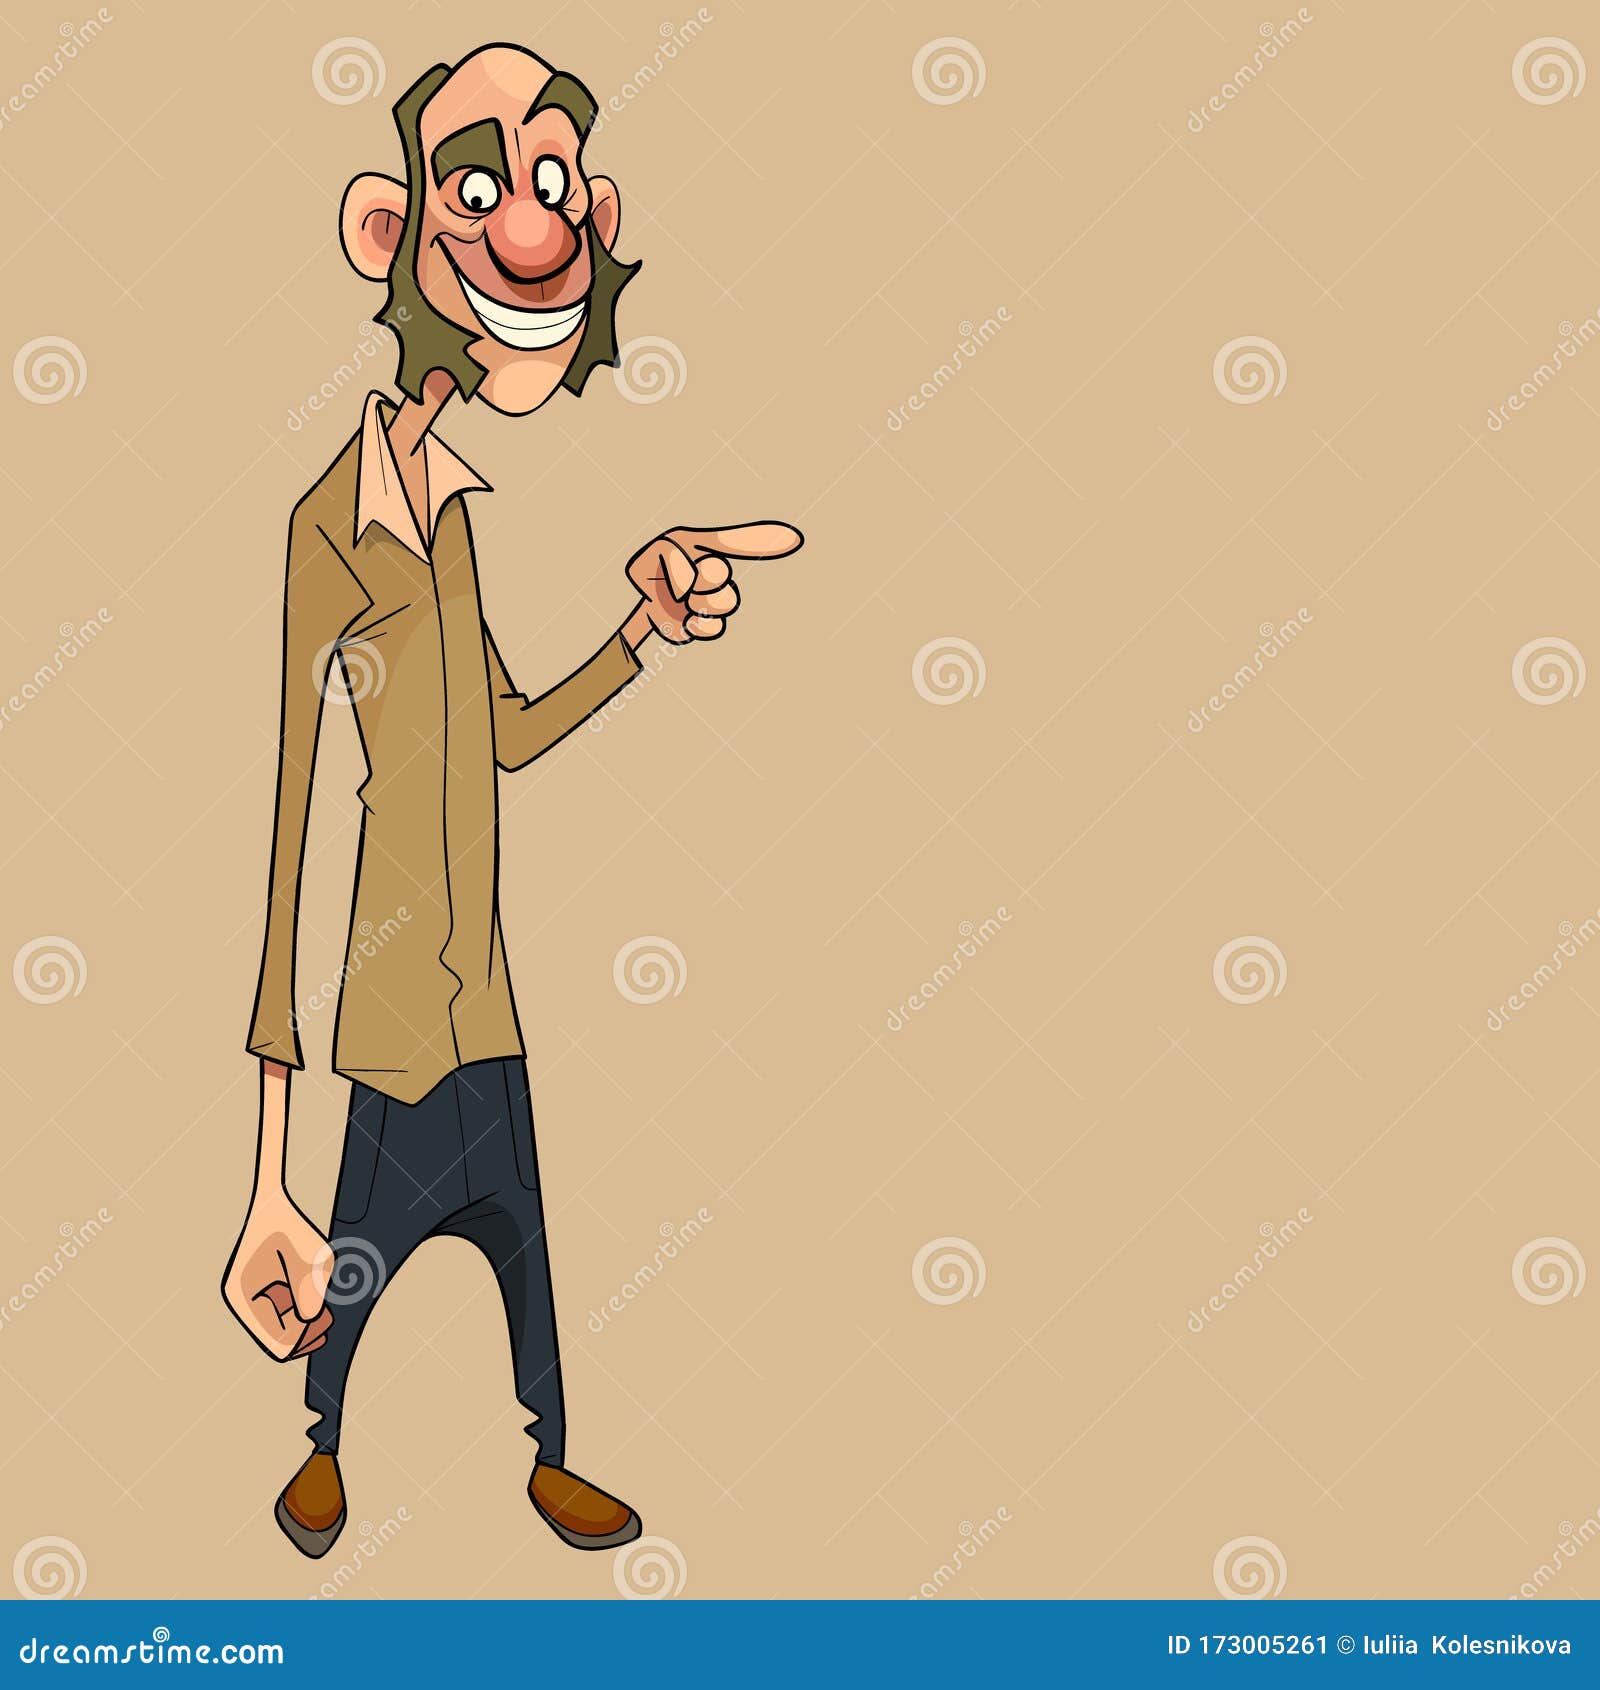 Sideburns Cartoons, Illustrations & Vector Stock Images - 384 Pictures ...